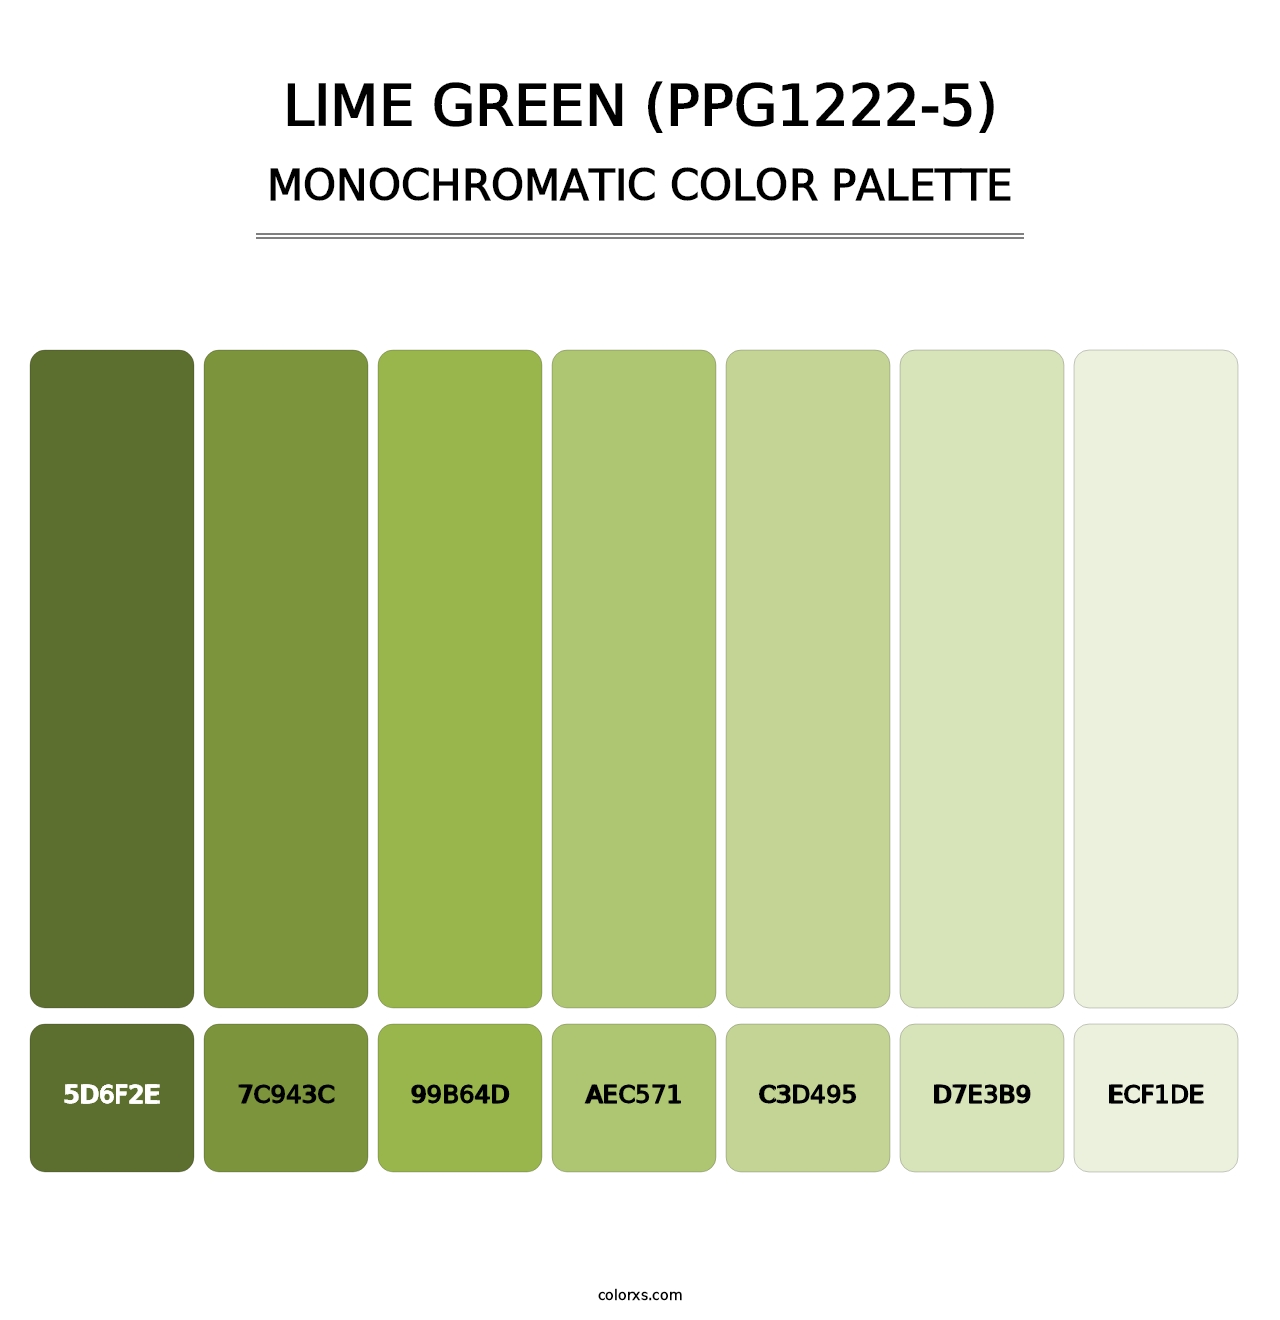 Lime Green (PPG1222-5) - Monochromatic Color Palette